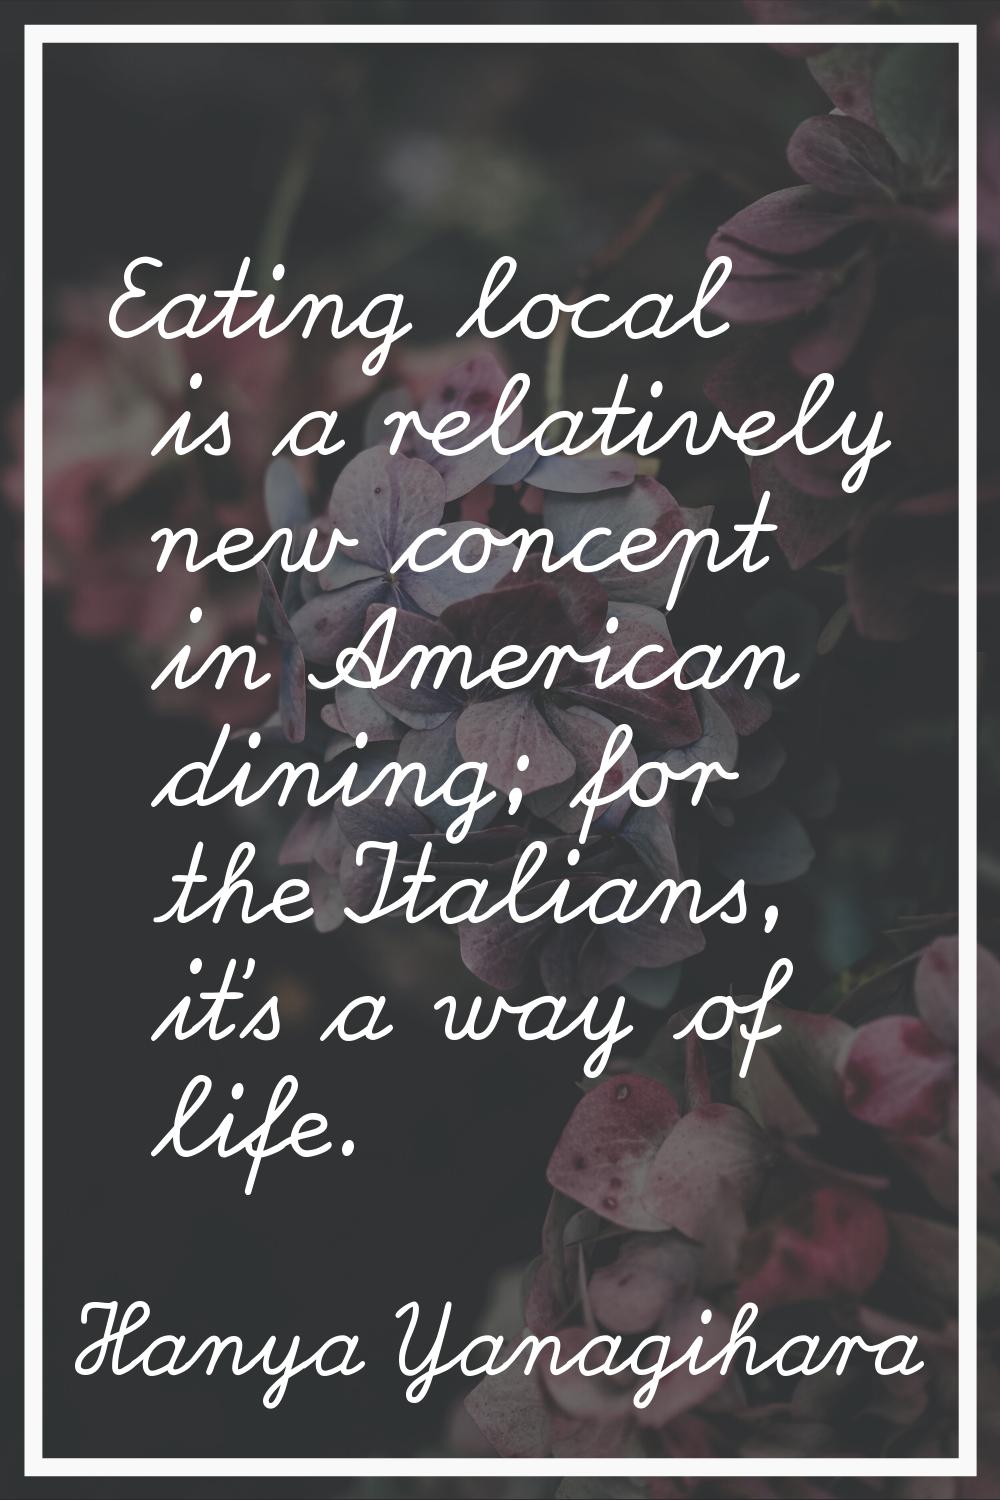 Eating local is a relatively new concept in American dining; for the Italians, it's a way of life.